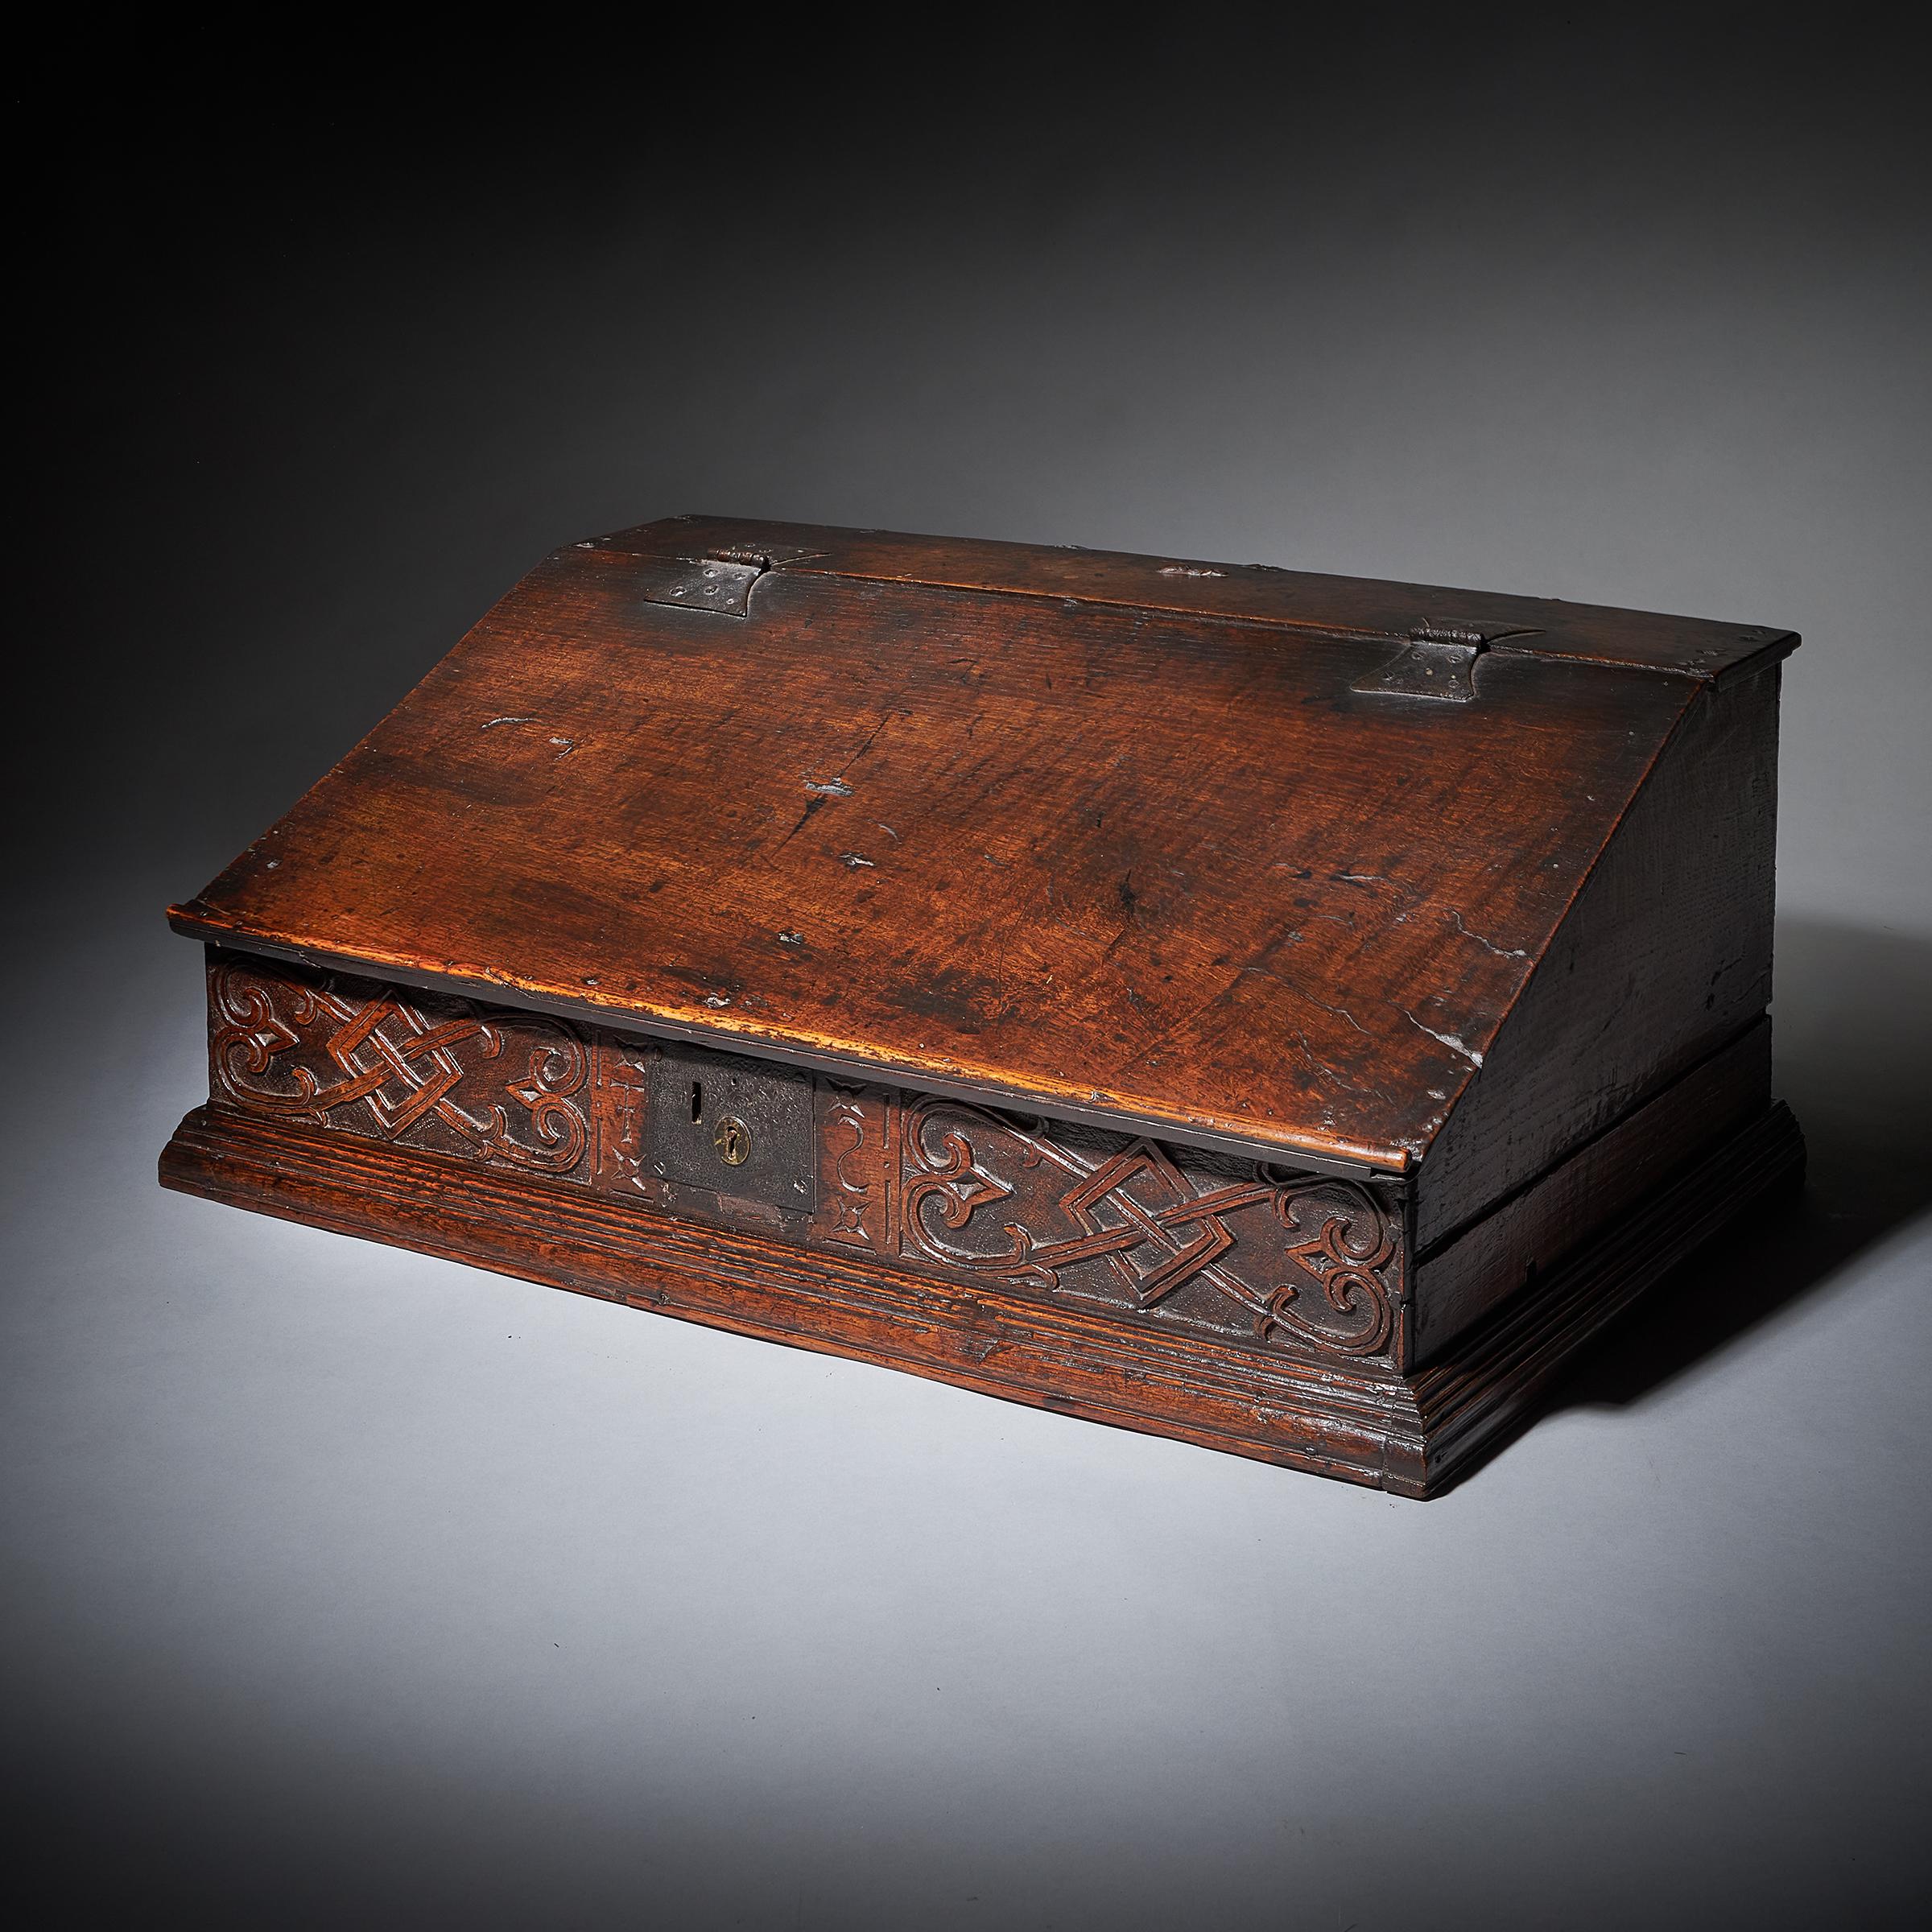 A rare 17th-century Charles II carved oak writing or desk box, circa 1660. England.

The box opens on the original butterfly hinges to reveal a fitted interior of three oak-lined drawers. 

The deep carving to the frieze is very much in the